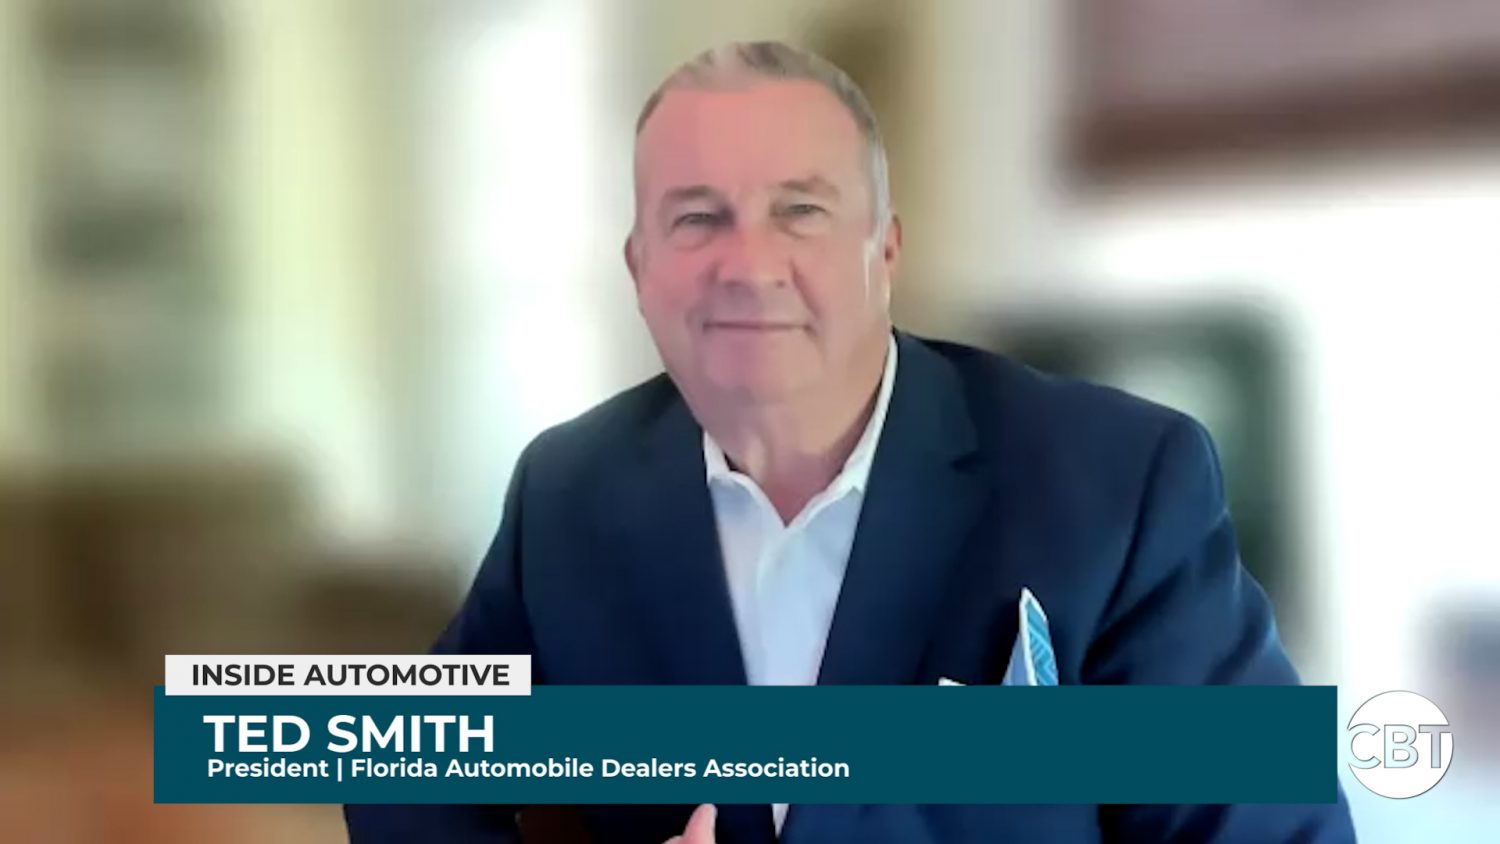 Joining us on the latest episode of Inside Automotive is Ted Smith, President of the Florida Automobile Dealers Association.